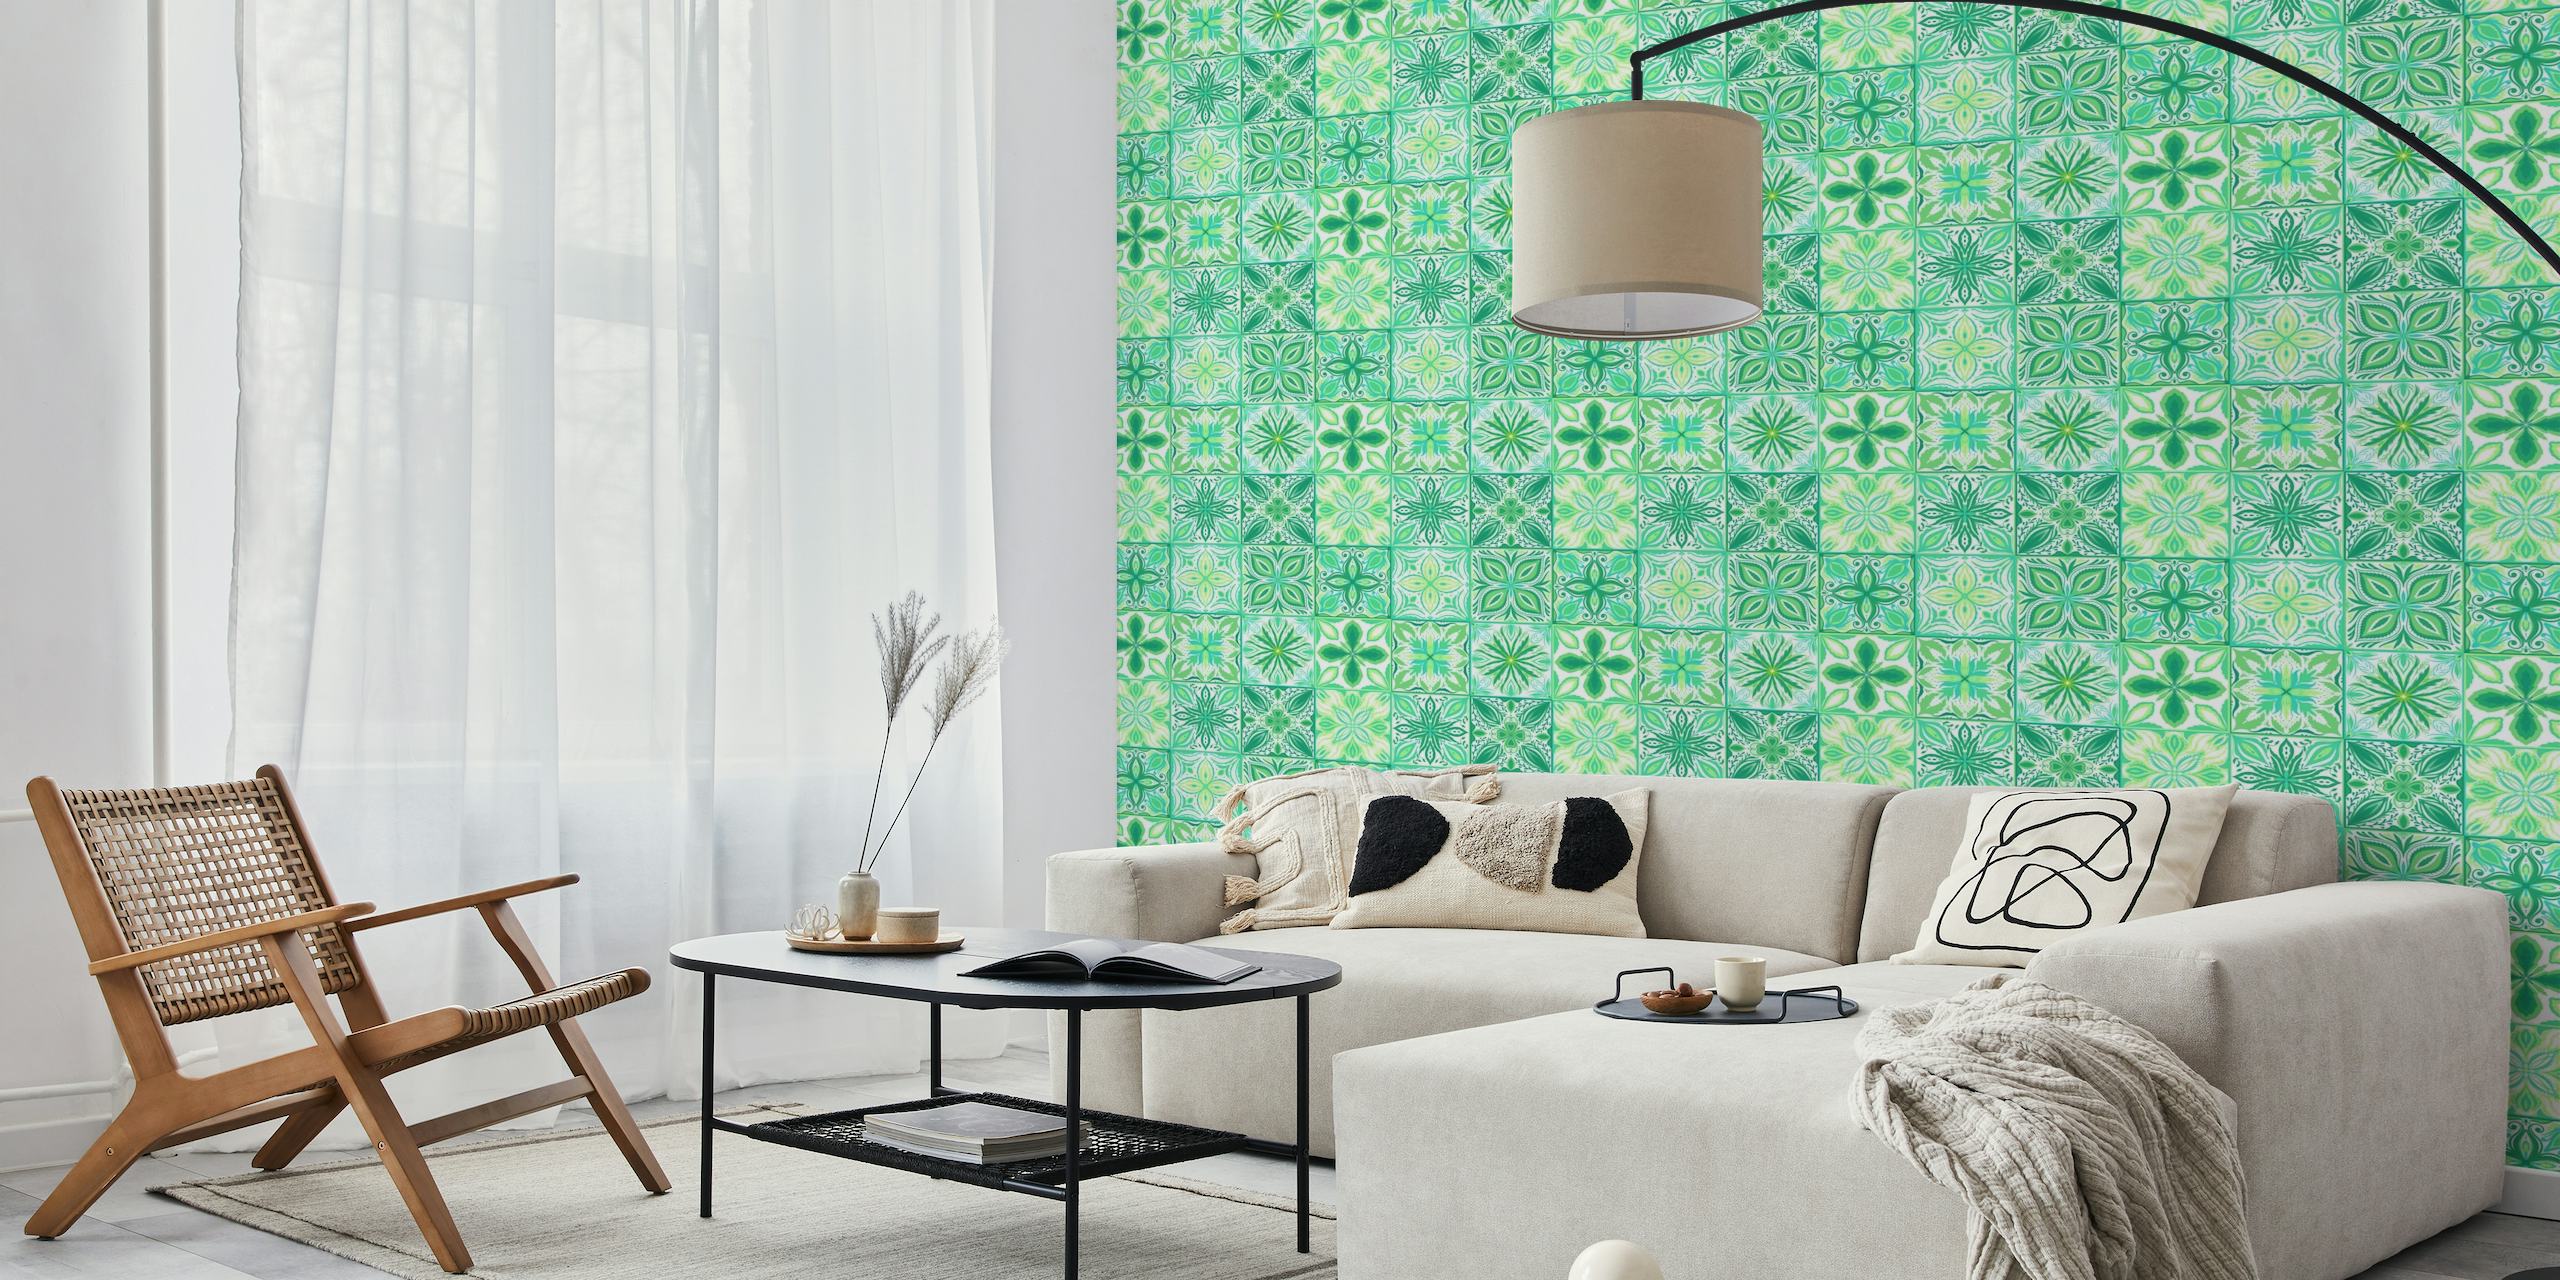 Ornate tiles in green and white papiers peint